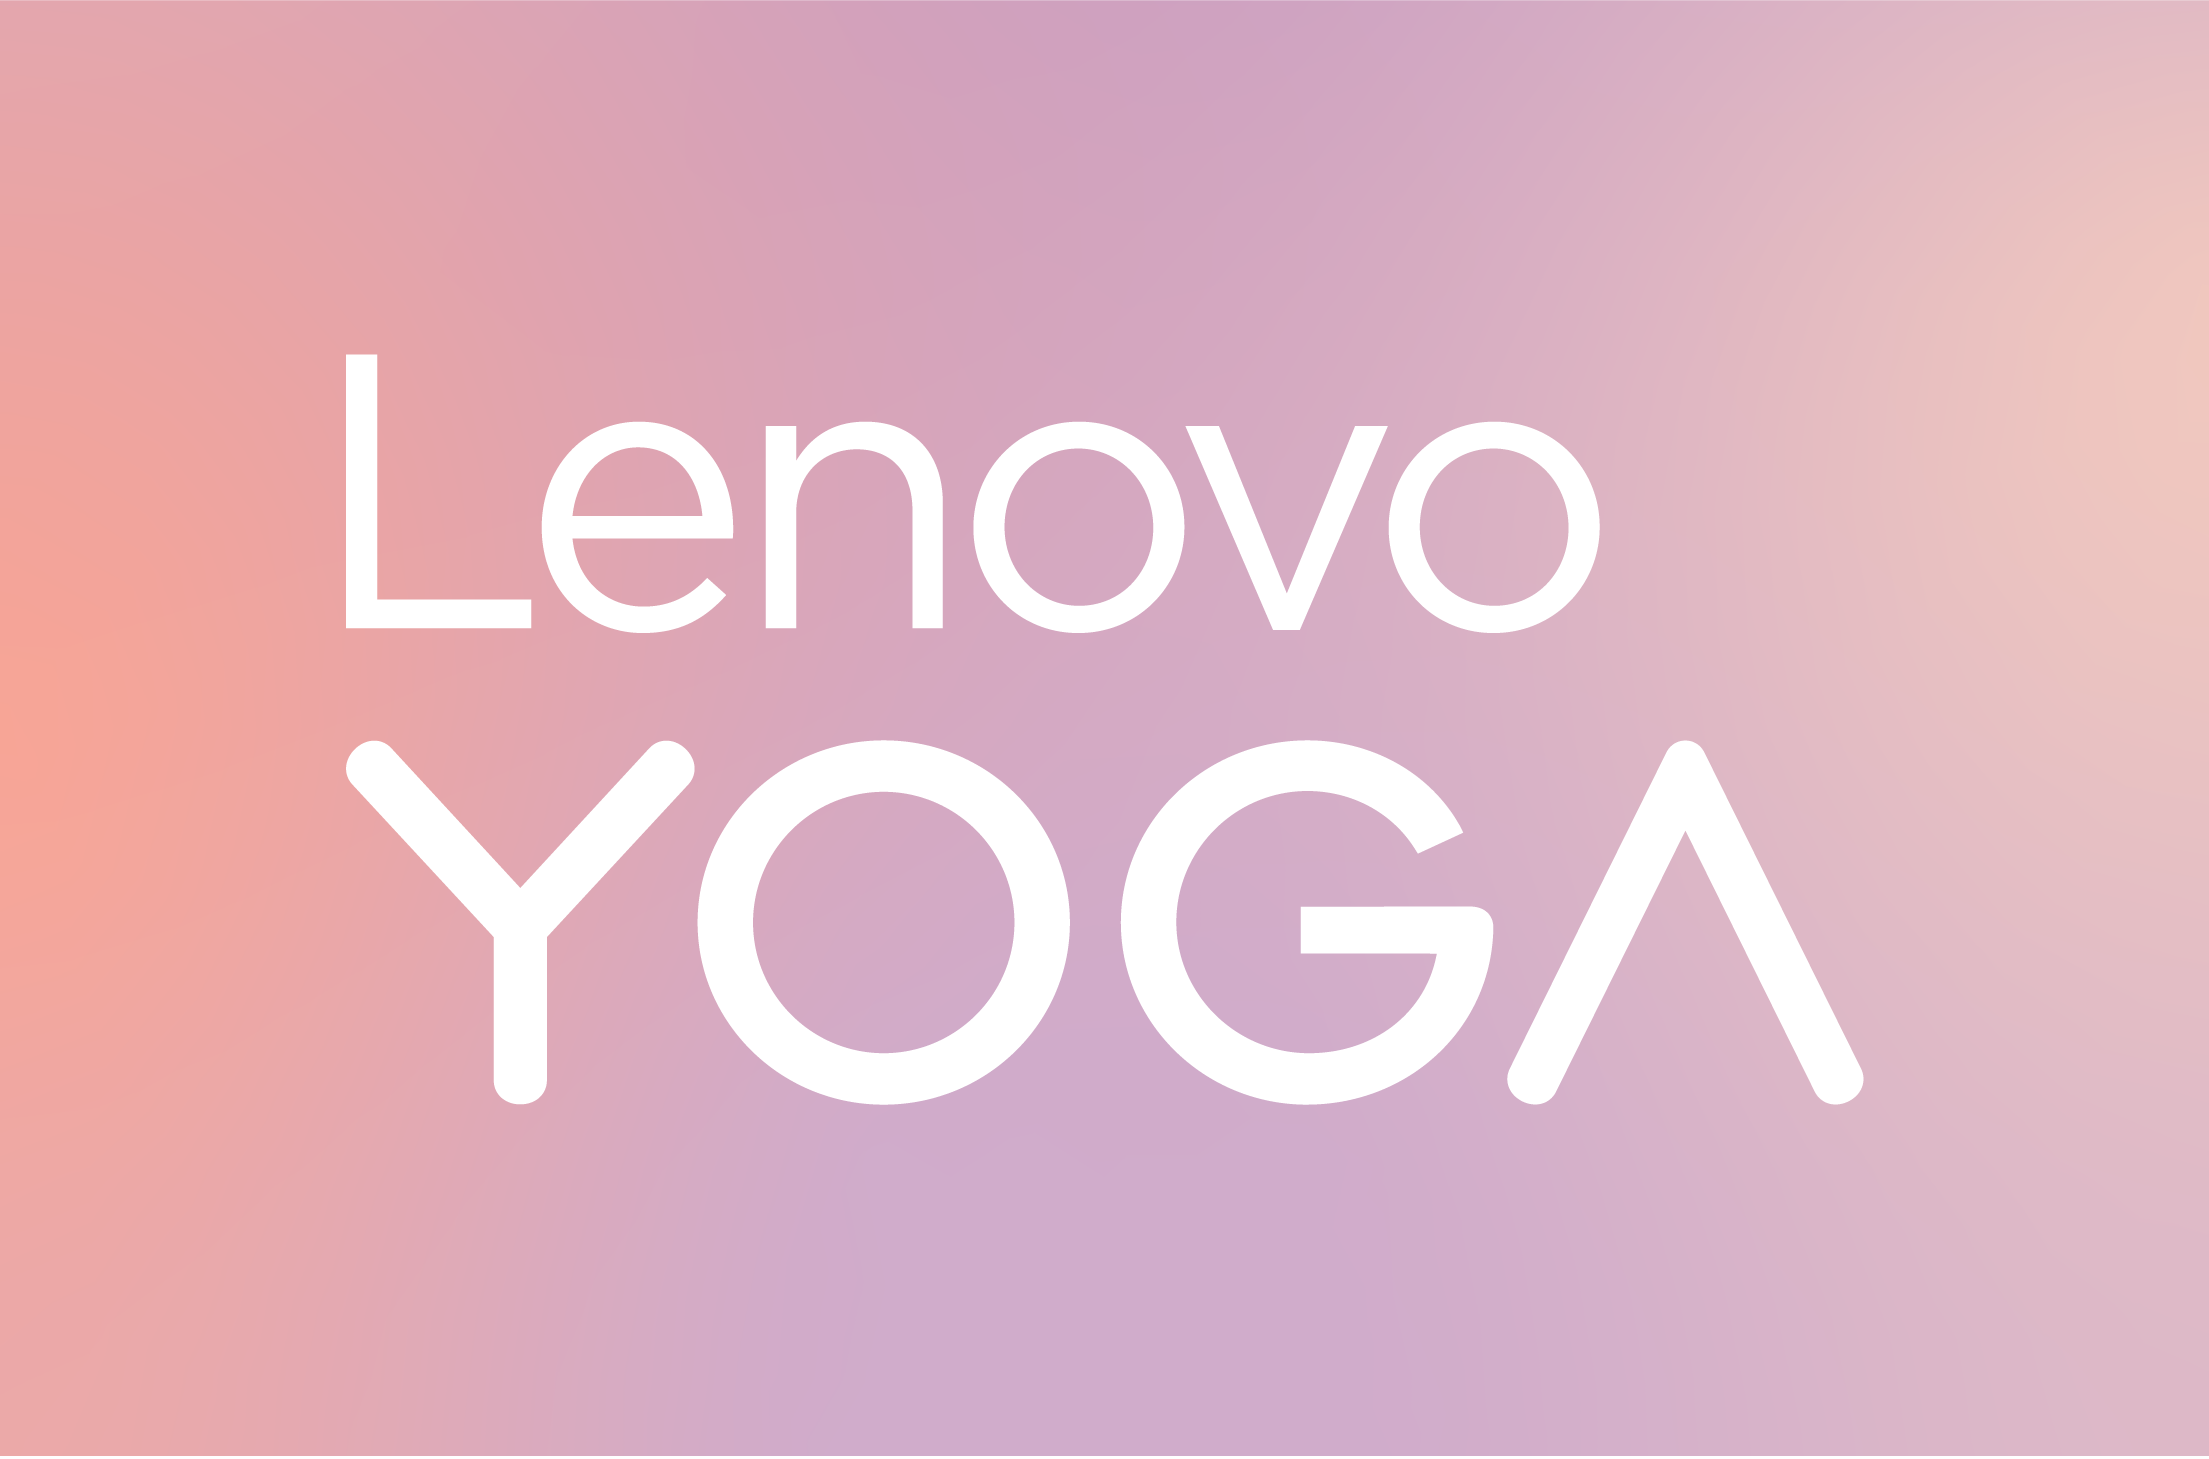 Lenovo Yoga wordmark in white on a pale background does not provide enough visual contrast.